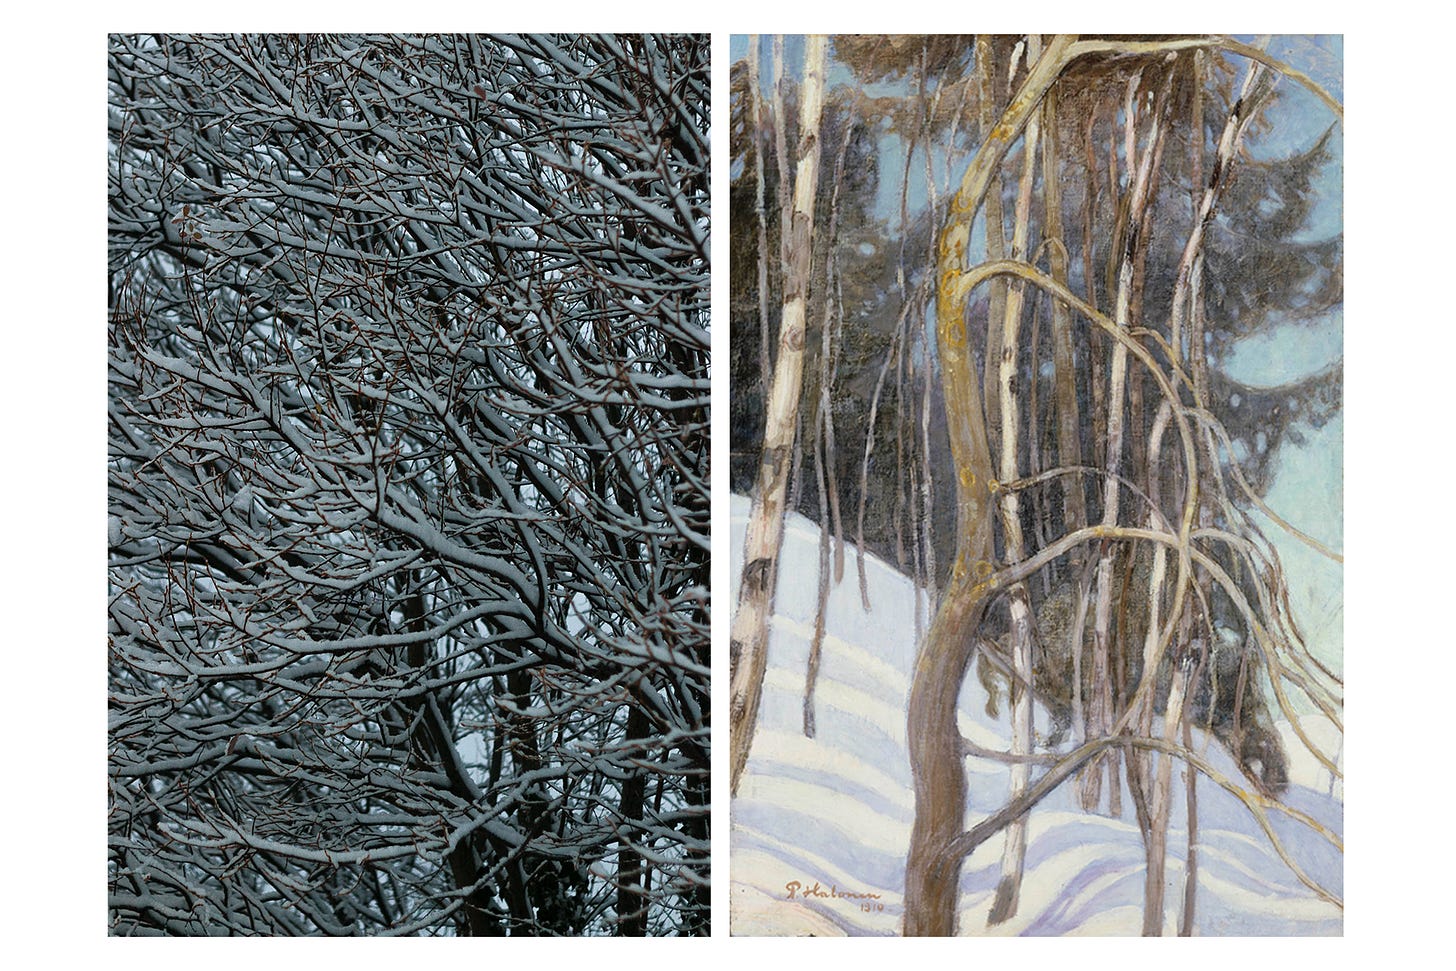 Left photograph is a close up of hundreds of snow covered branches, the light is blue and overcast. The right image is an oil painting of some trees on a snowy hillside, their branches are displayed as a tangled wave. 